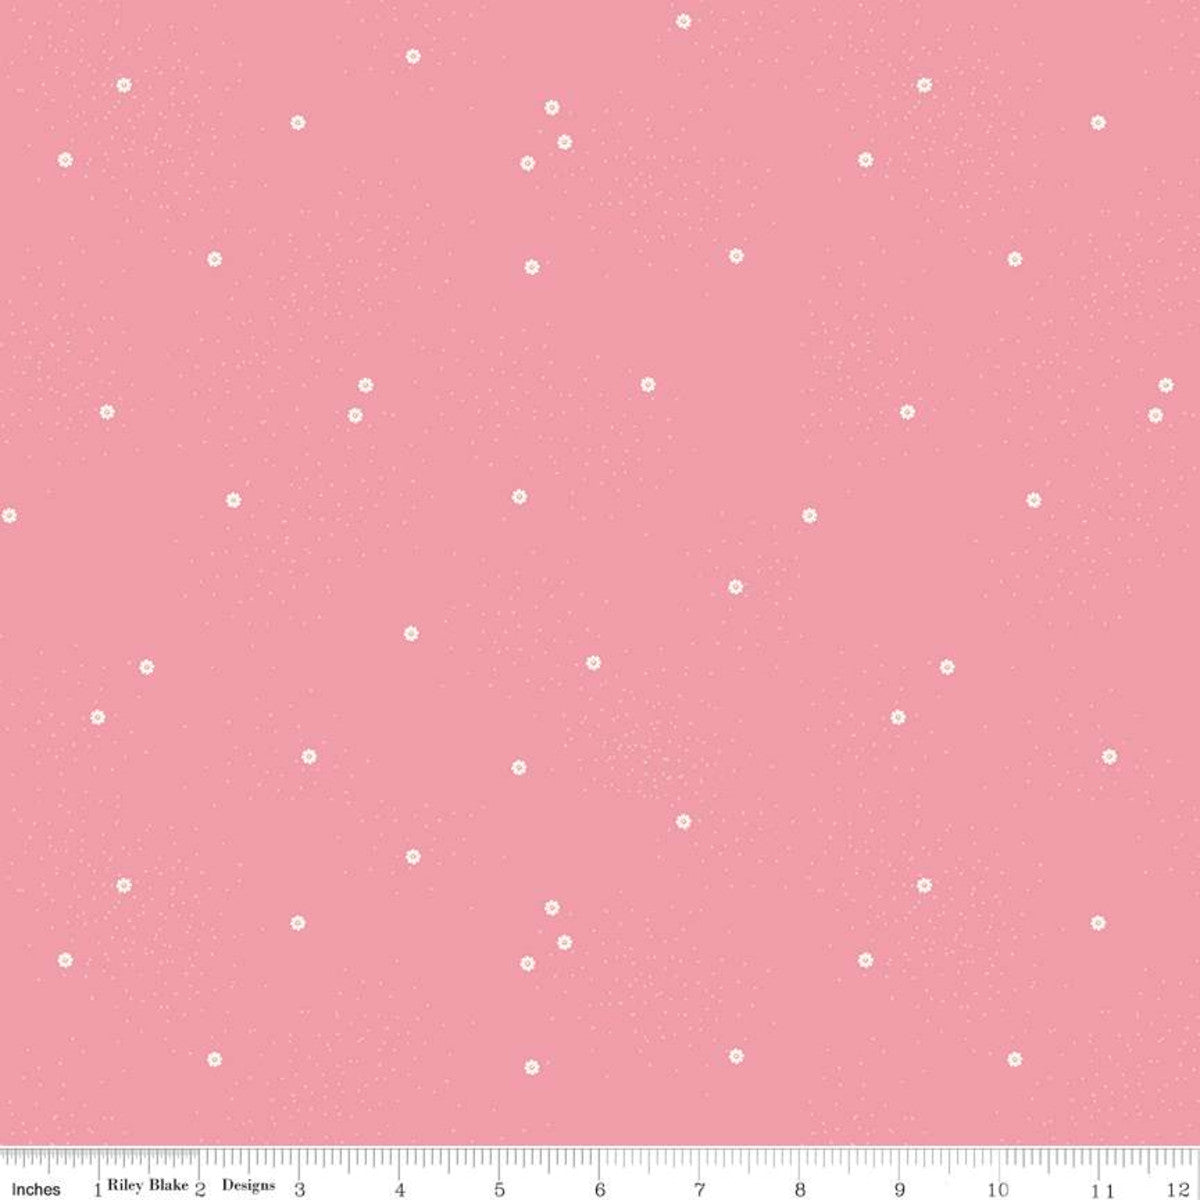 Dainty Daisy in peony by Beverly McCullough for Riley Blakes Designs basic fabric in medium peony pink with scattered tiny daisies and tone on tone pin dots cotton quilting sewing fabric material